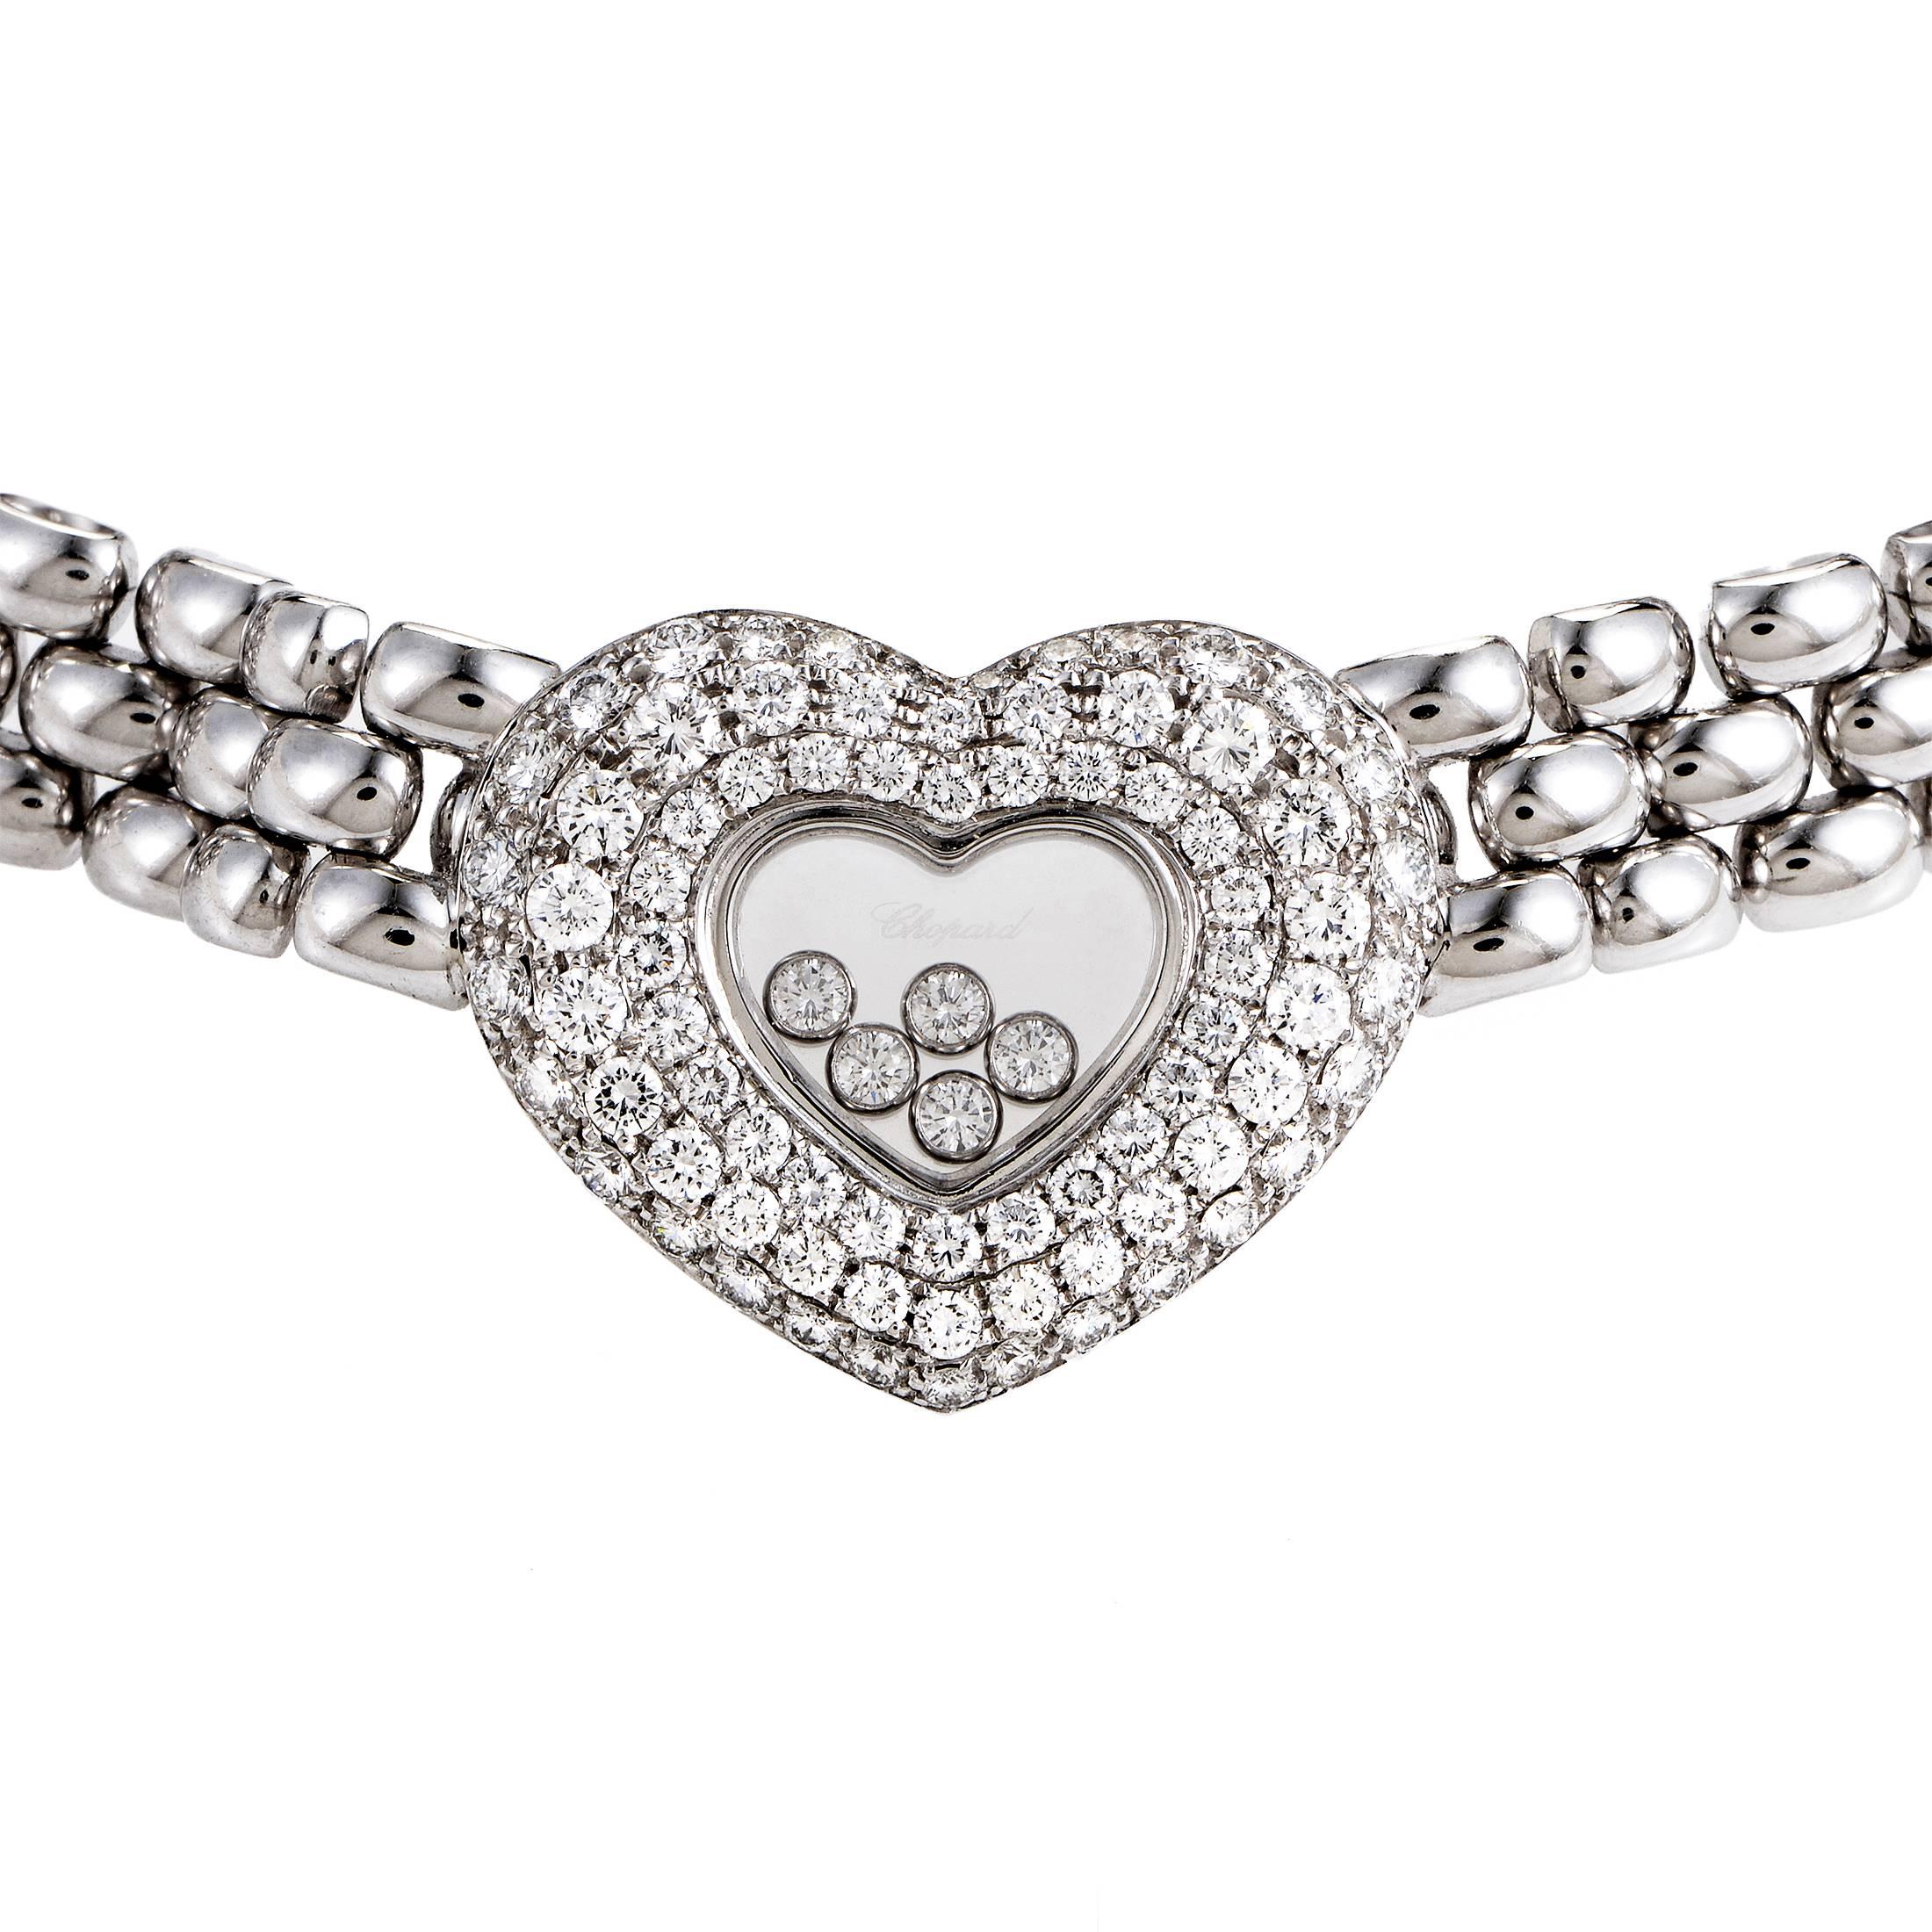 A scintillating and compelling visual effect is produced by the fantastic interplay of immaculately polished 18K white gold links in this astounding necklace from Chopard while glistening diamonds emphasize the romantic heart-shaped pendant which